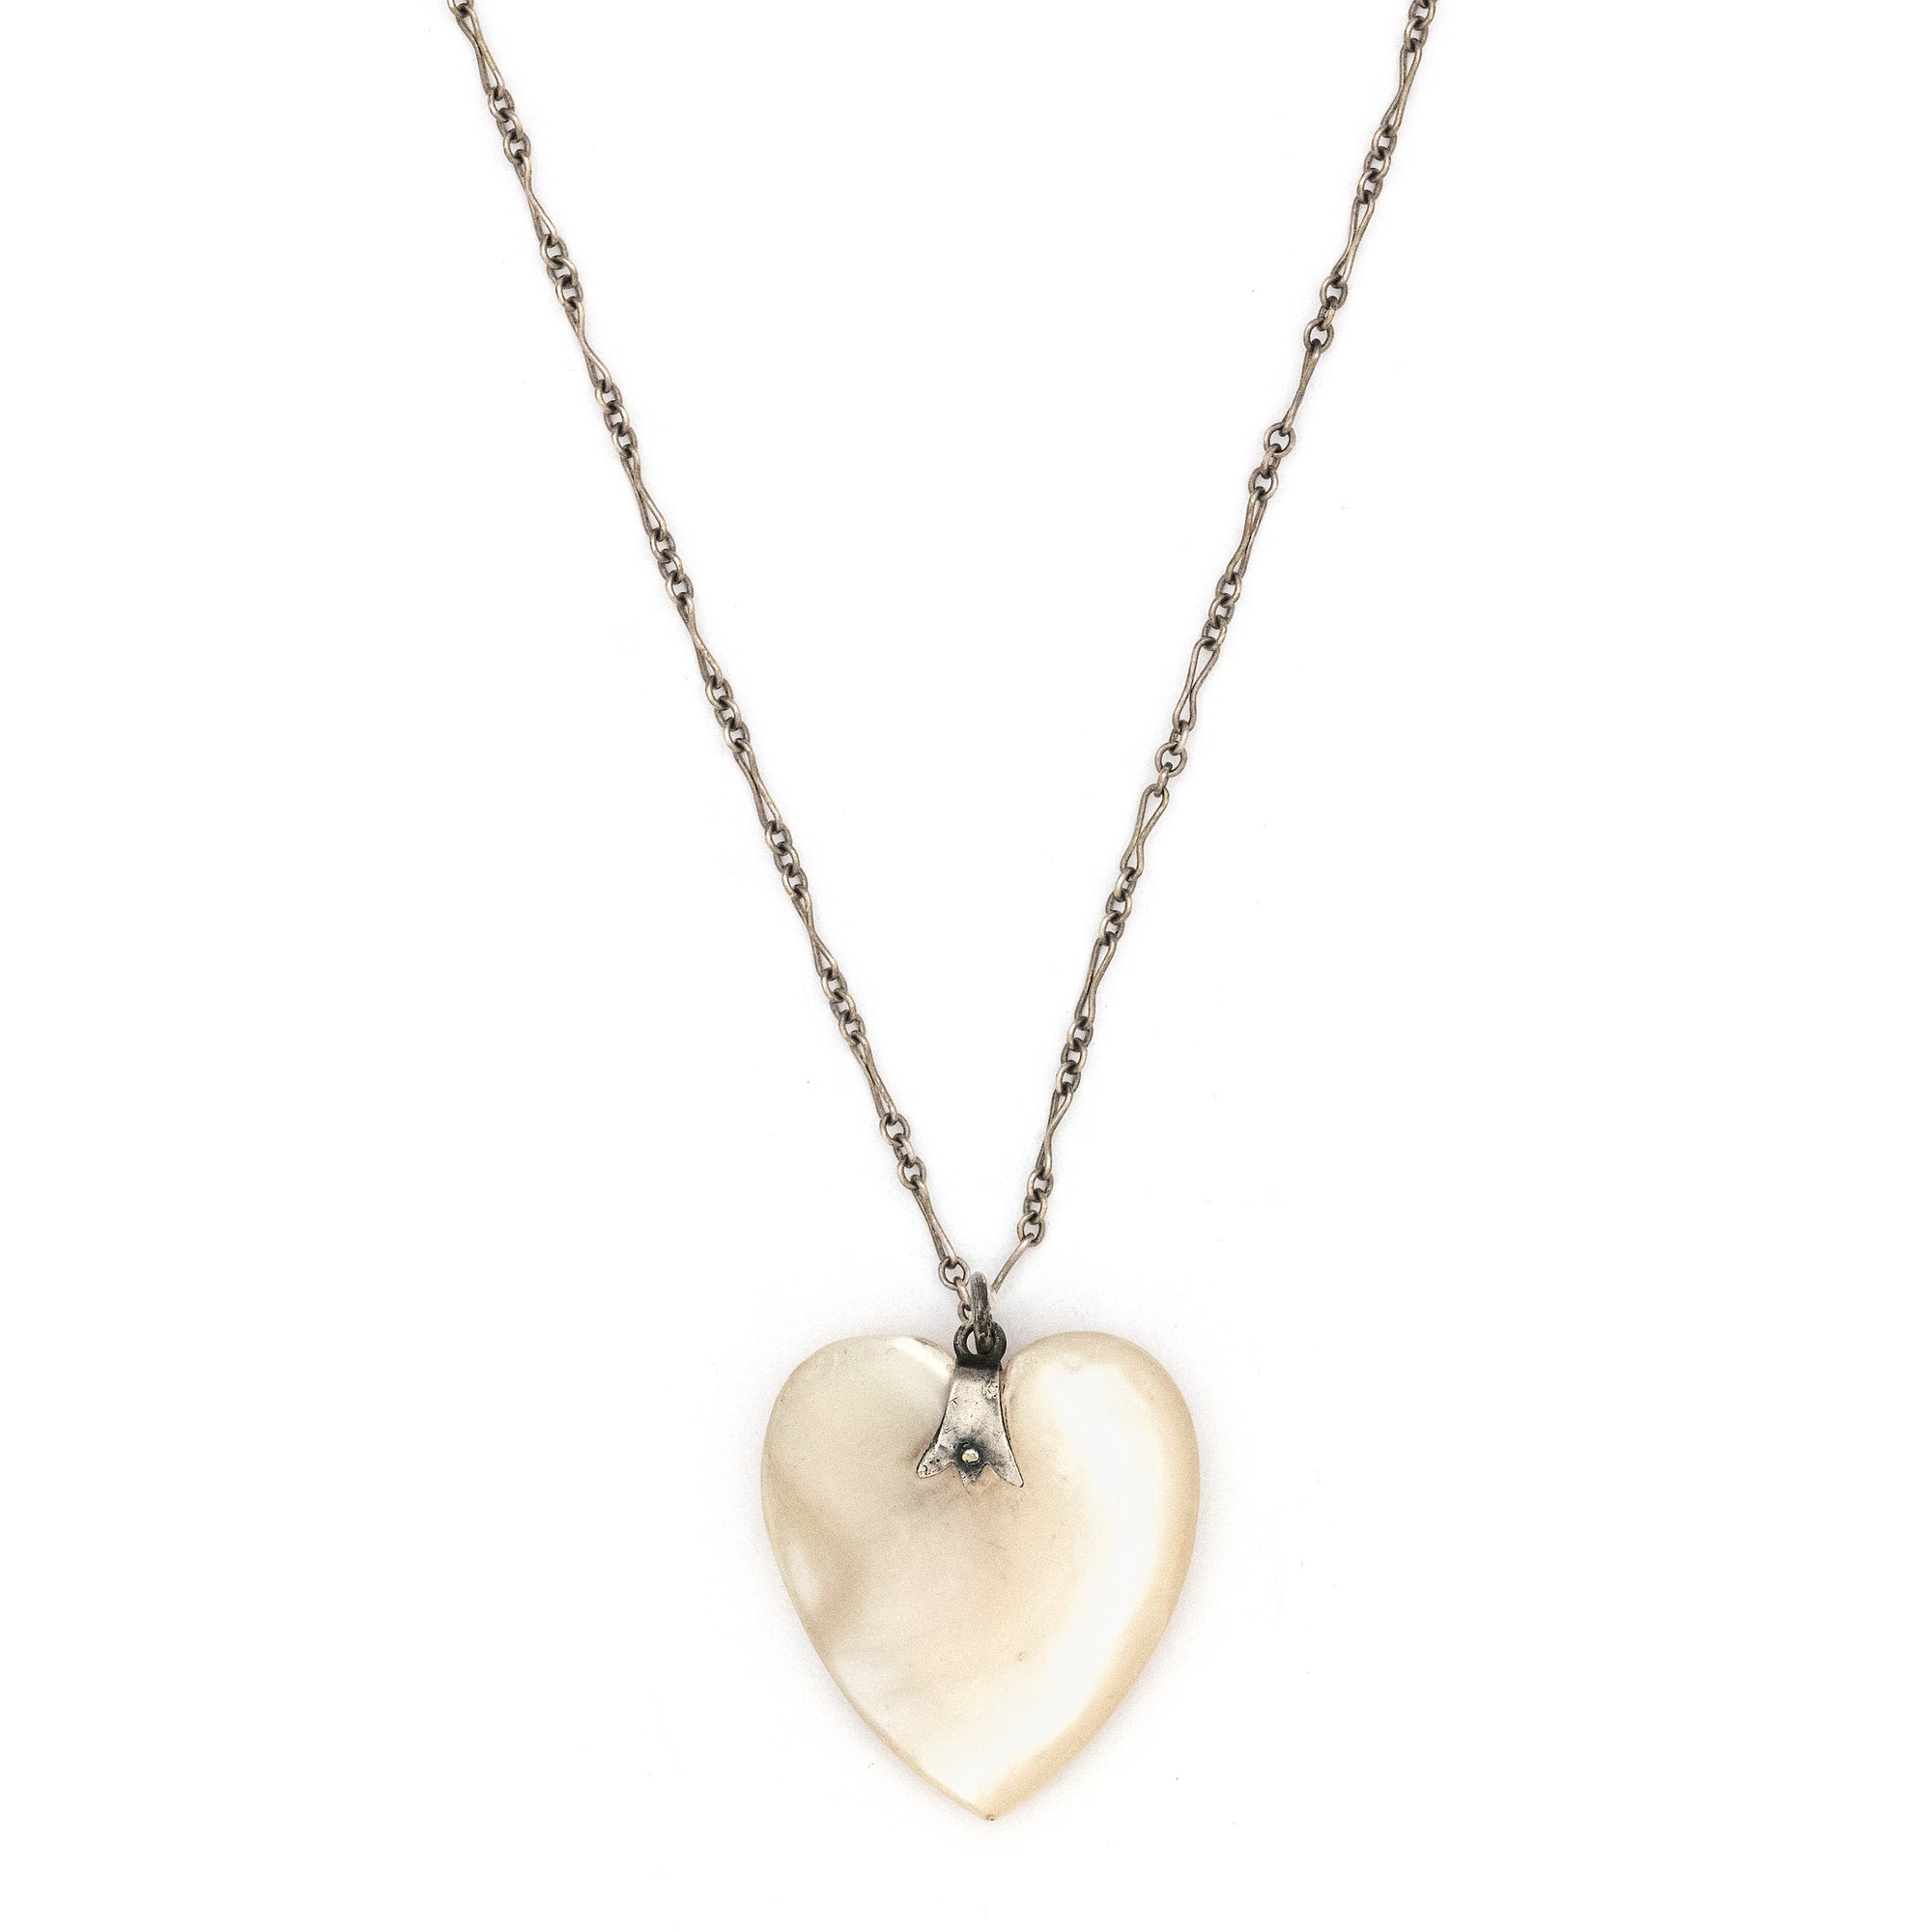 This sweet heart shaped Victorian mother of pearl pendant is beautifully iridescent and features a sterling silver bail. Paired with one of our antique silver chains, this charm can be worn both as a pendant or in a cluster of charms.  Front charm view